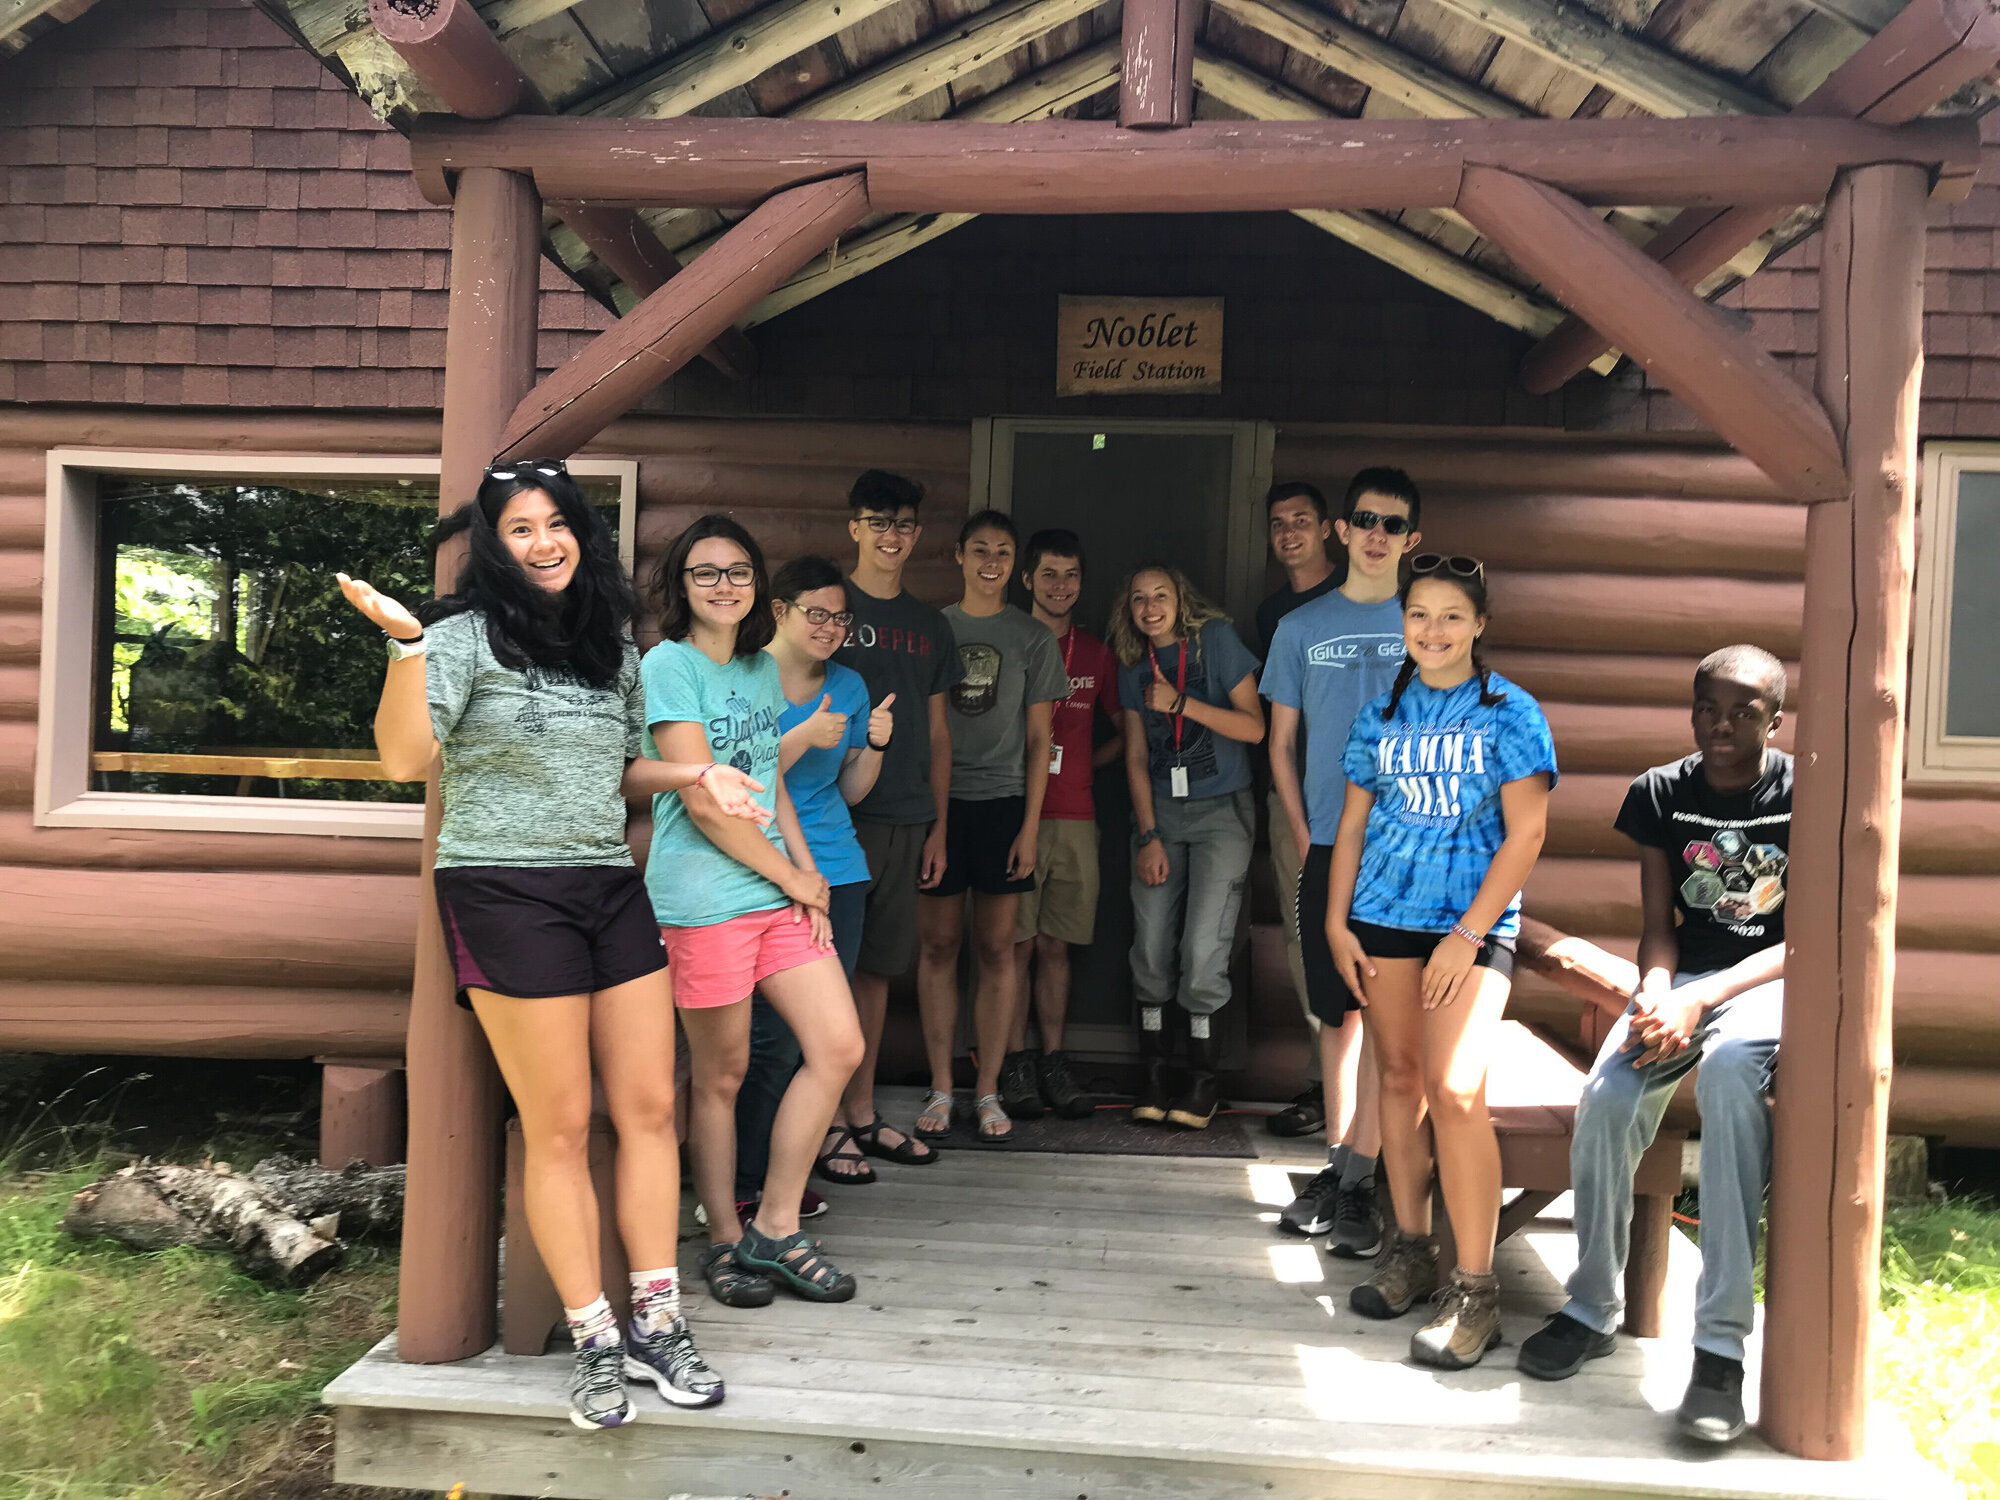   Eight high school students attended the Michigan Tech Summer Youth Program Exploration: Aquatic Ecology at Gratiot Lake in 2019. Since 2004, GLC has hosted this program at the Noblet Field Station and provides a teacher salary for the five-day prog